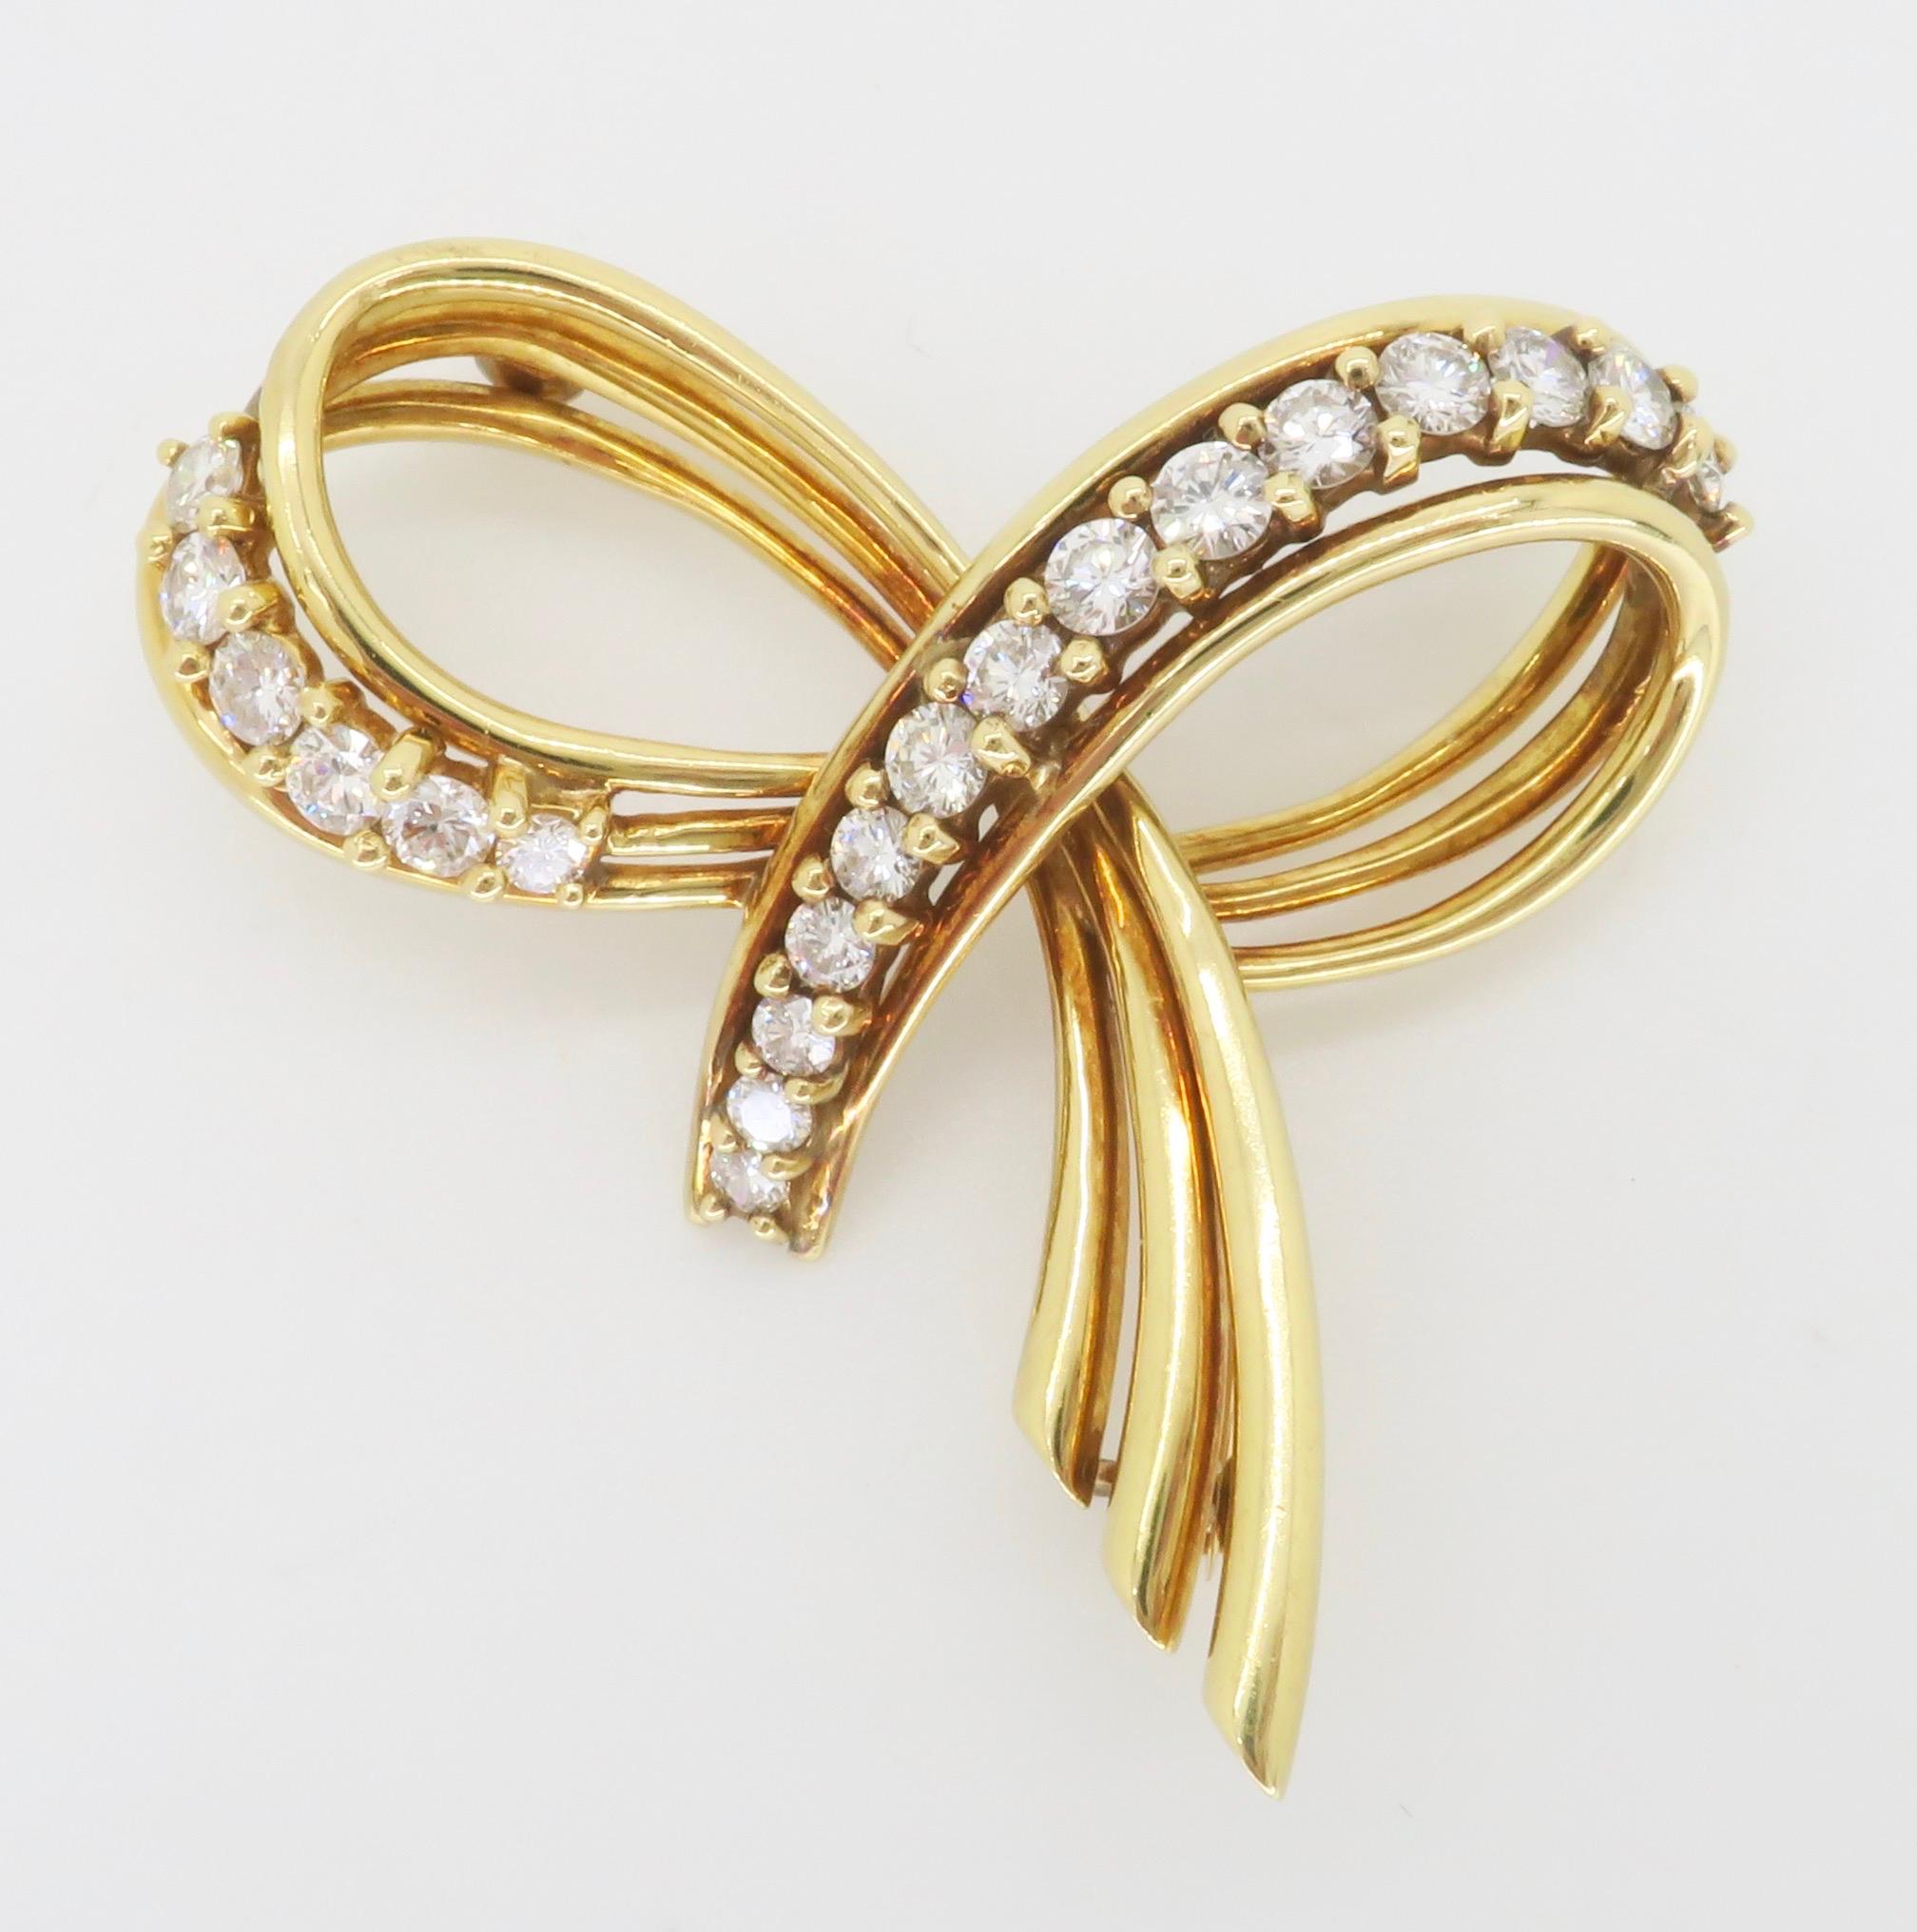 Vintage Tiffany & Co. Diamond Bow Brooch in 18k Yellow Gold  2